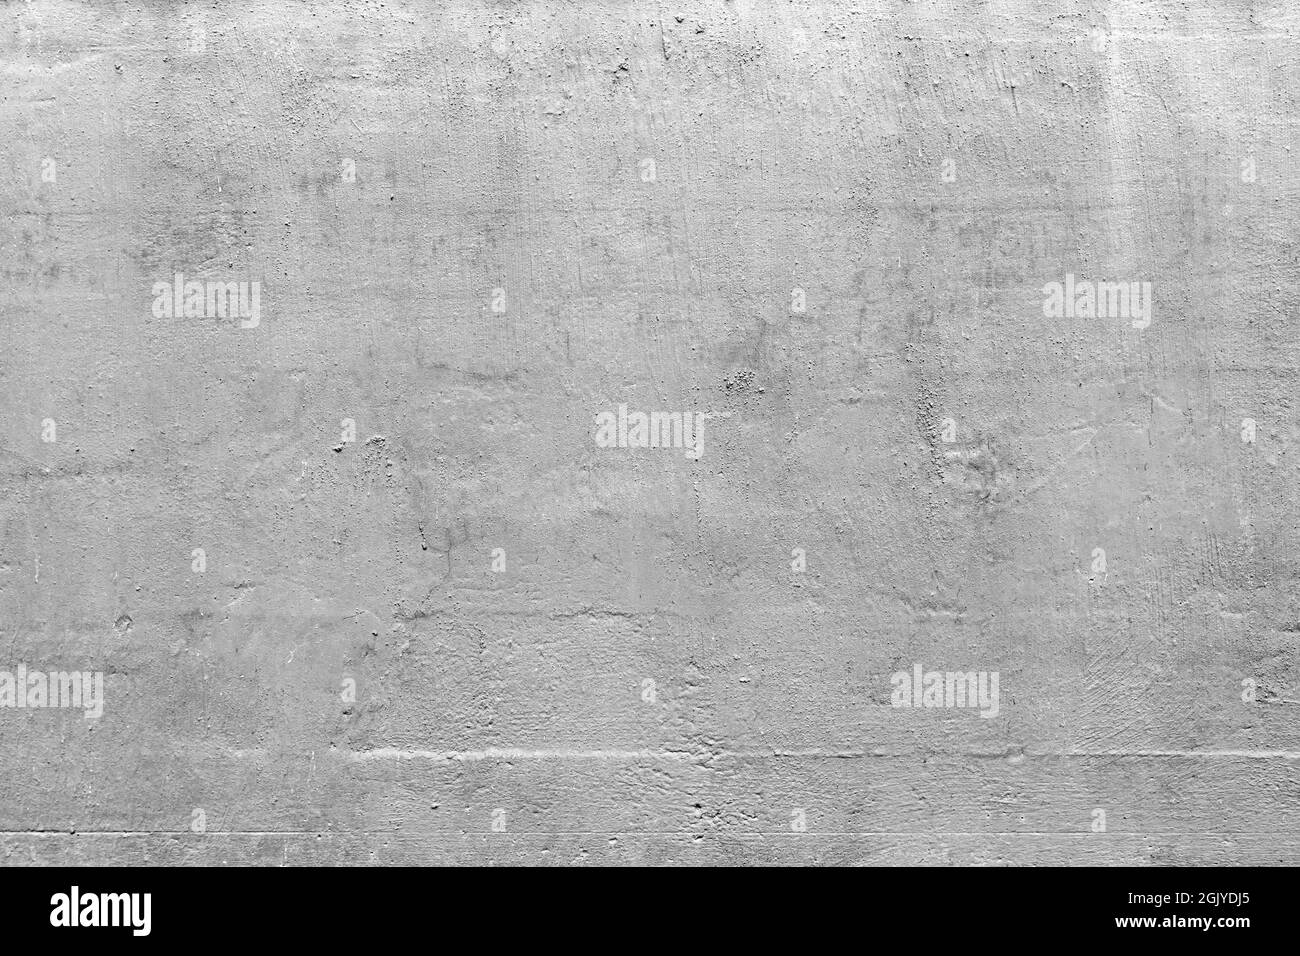 Close-up of plastered and painted concrete wall. Abstract high resolution full frame textured background in black and white. Copy space. Stock Photo